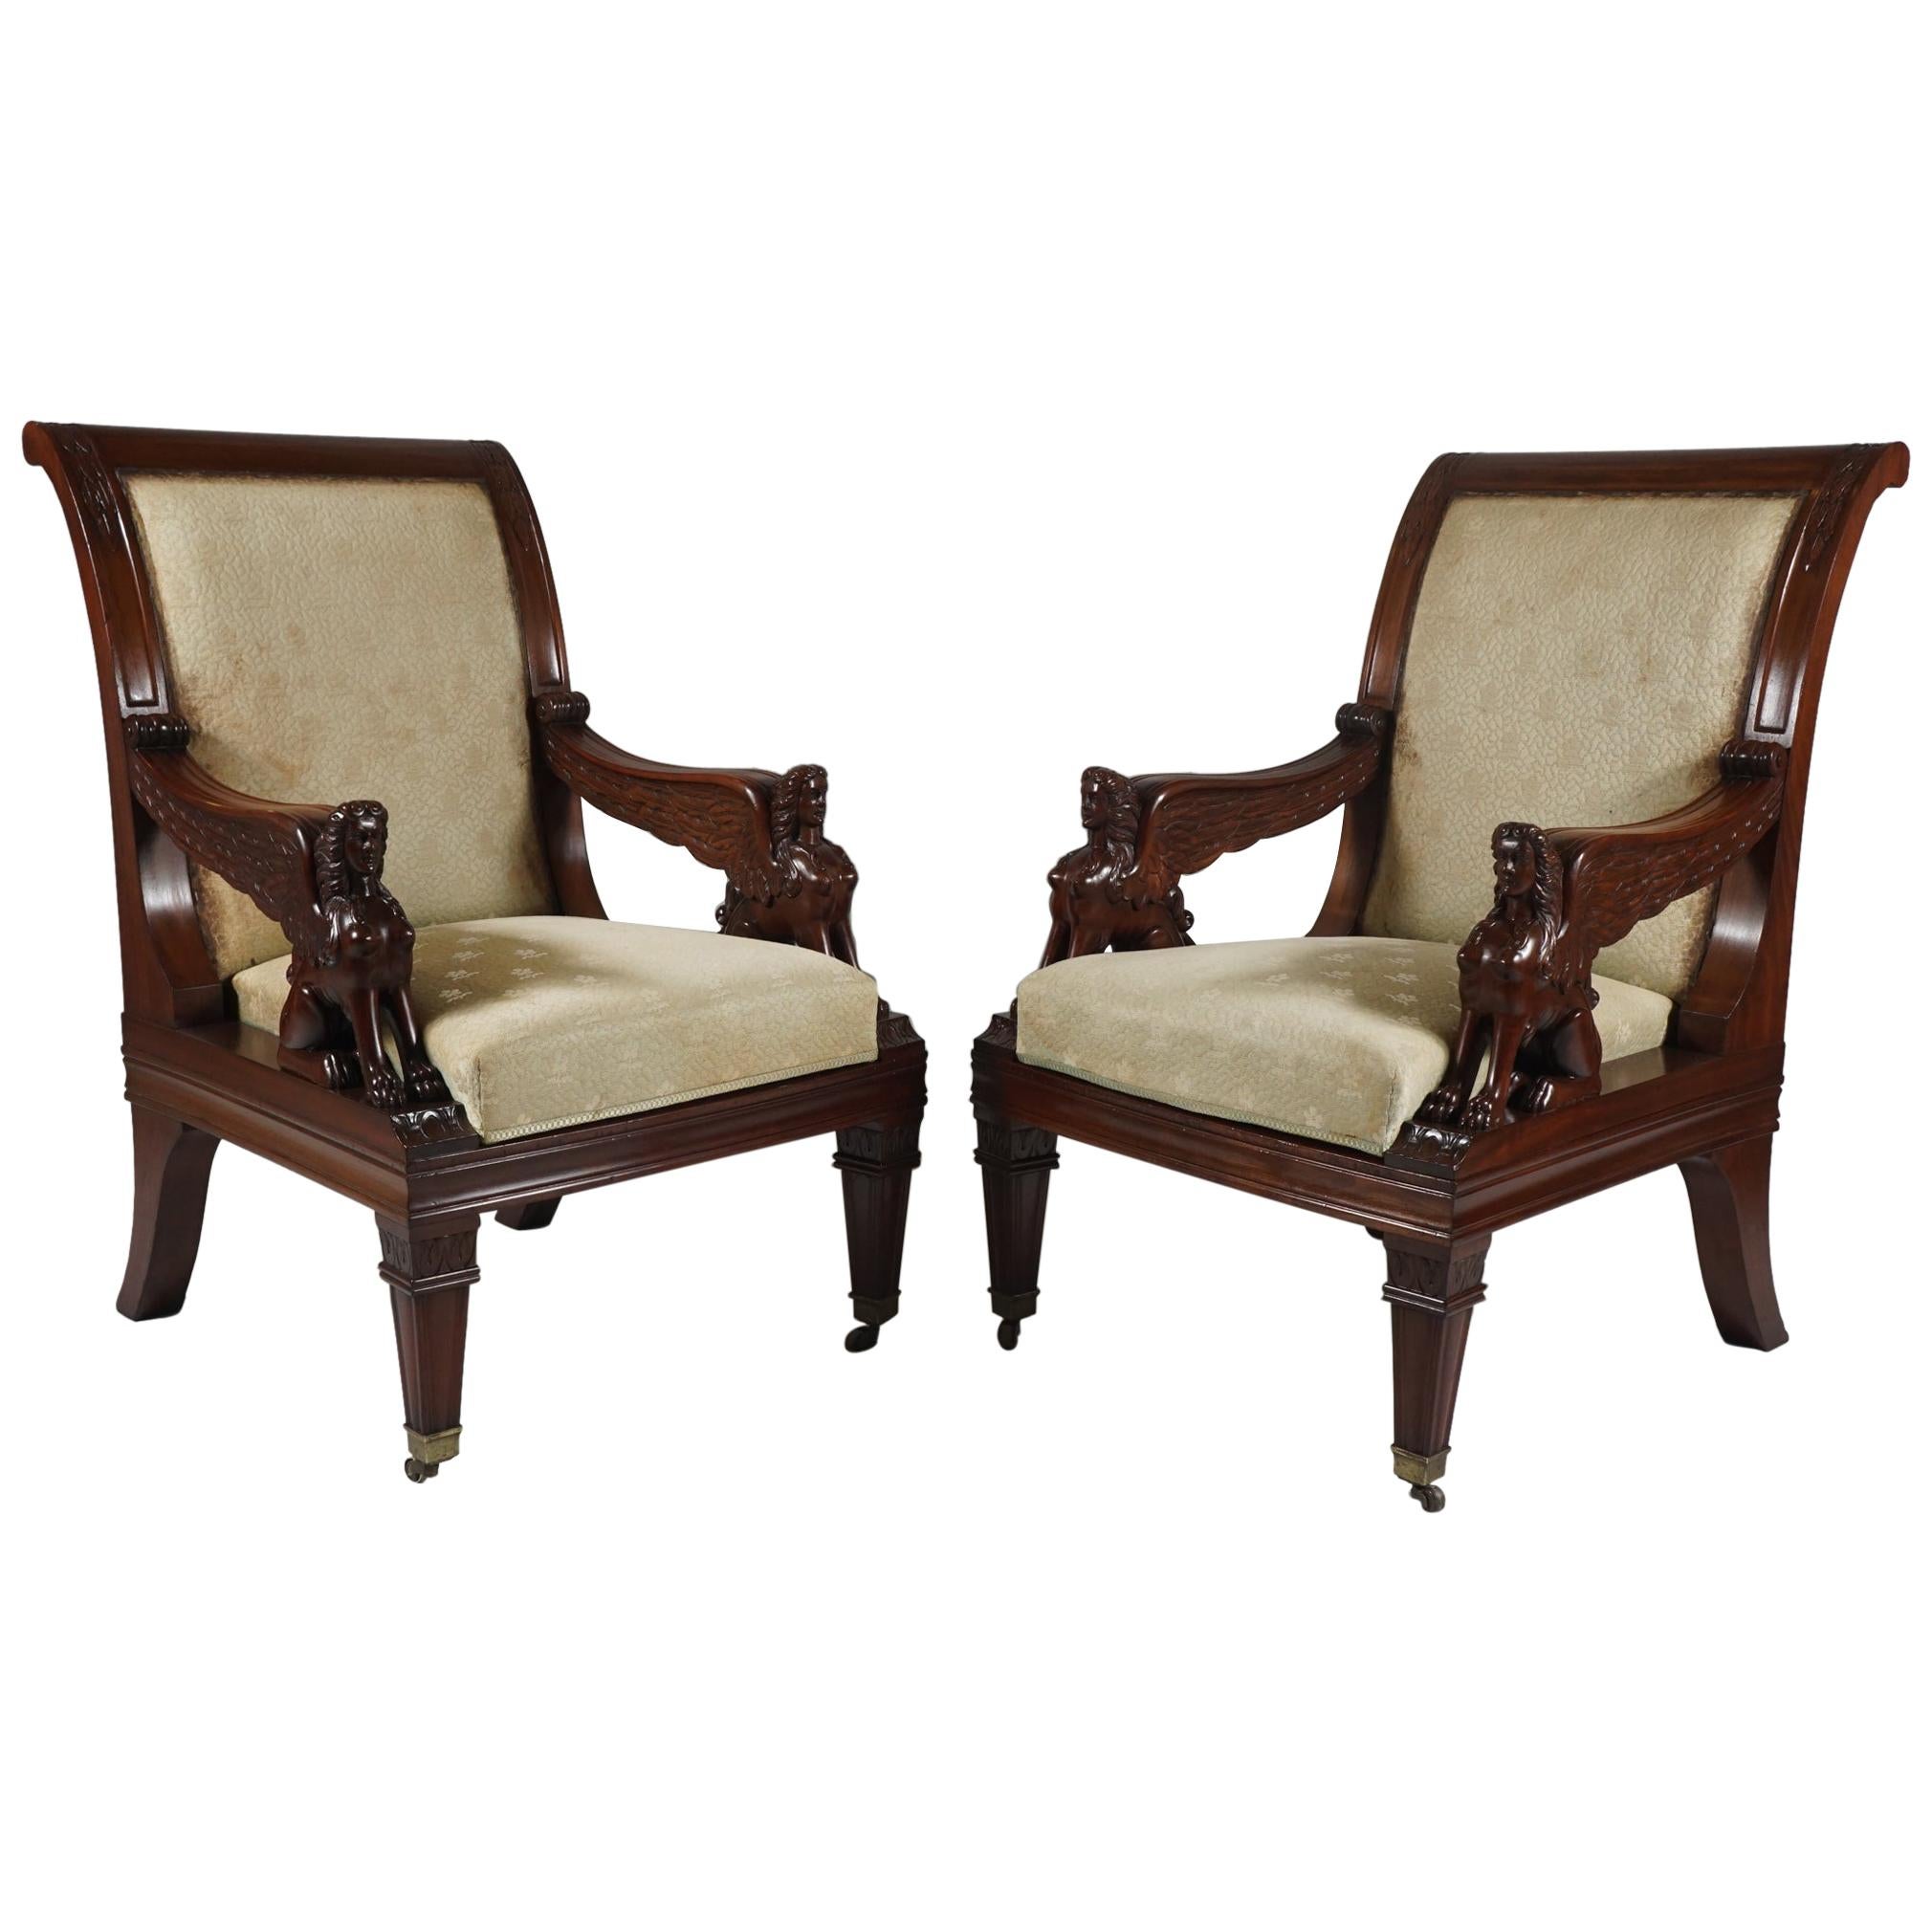 Pair of Carved Egyptian Revival Armchairs